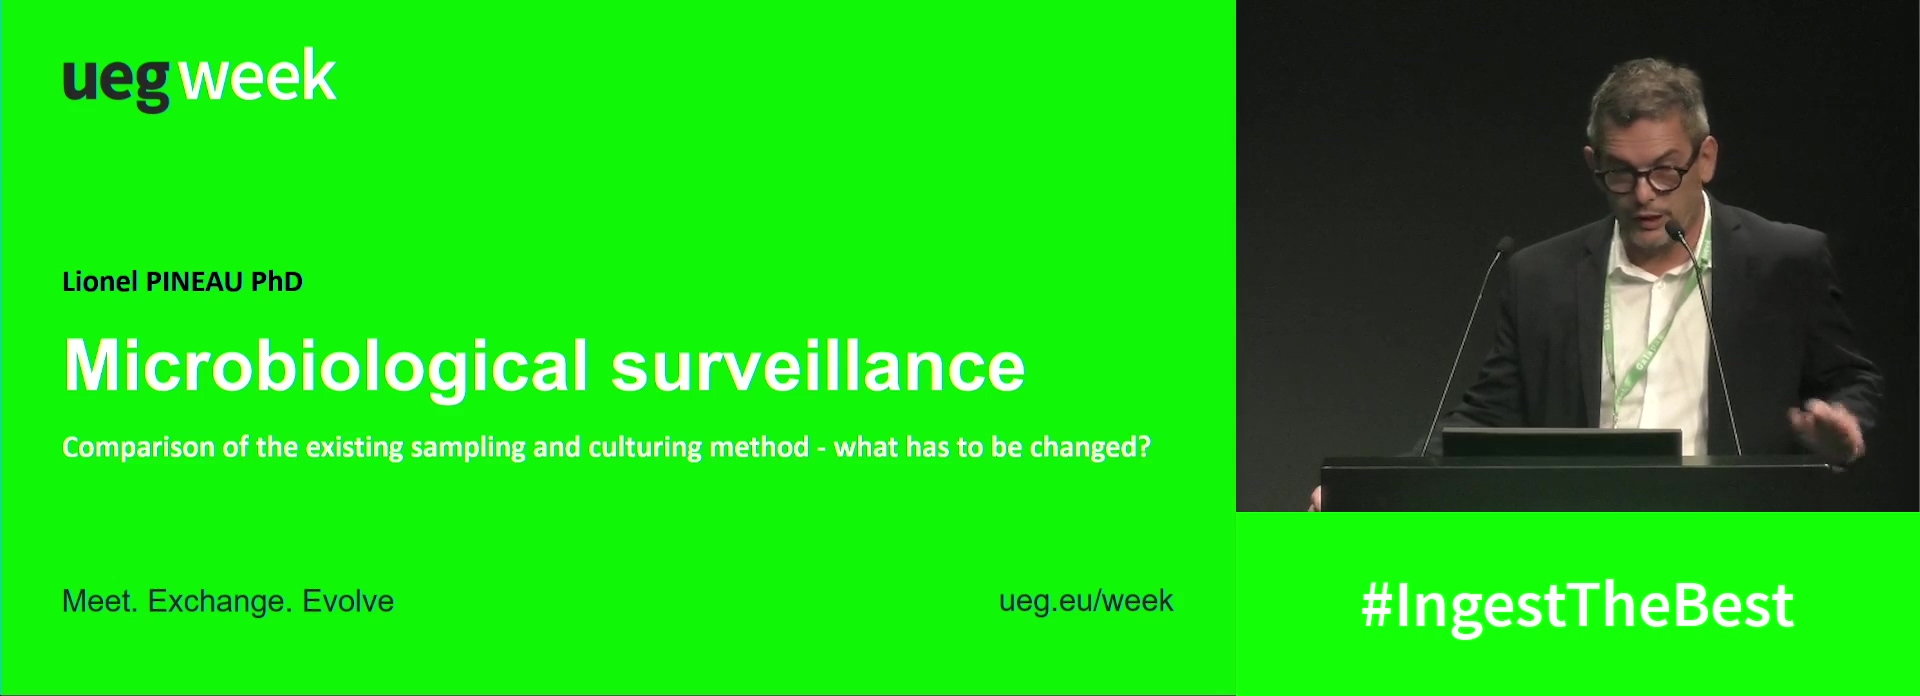 Microbiological surveillance: What has to be changed?